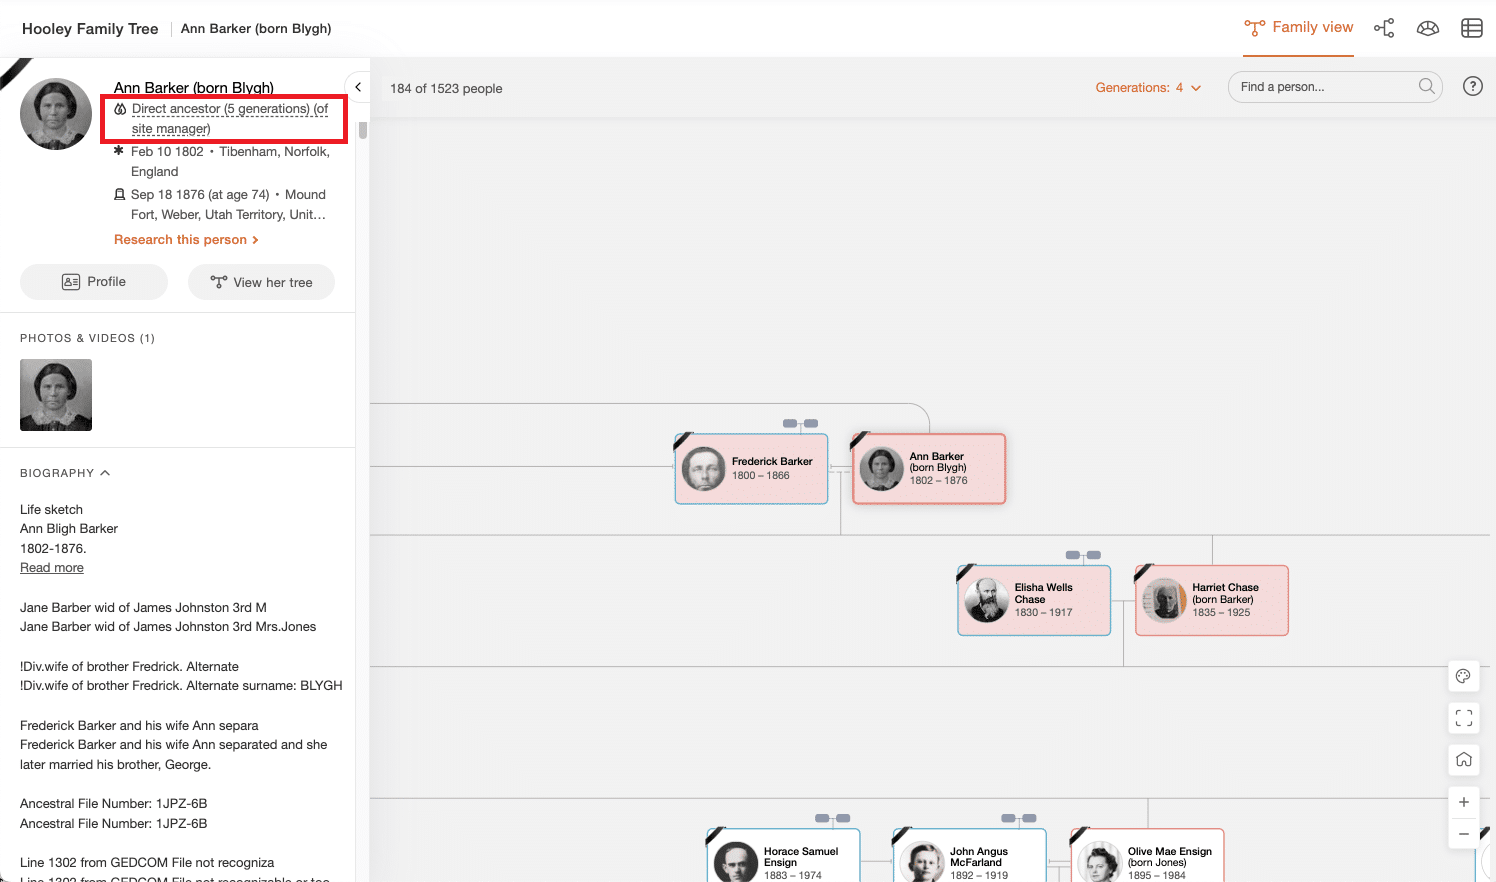 Profile panel showing relationship to site manager